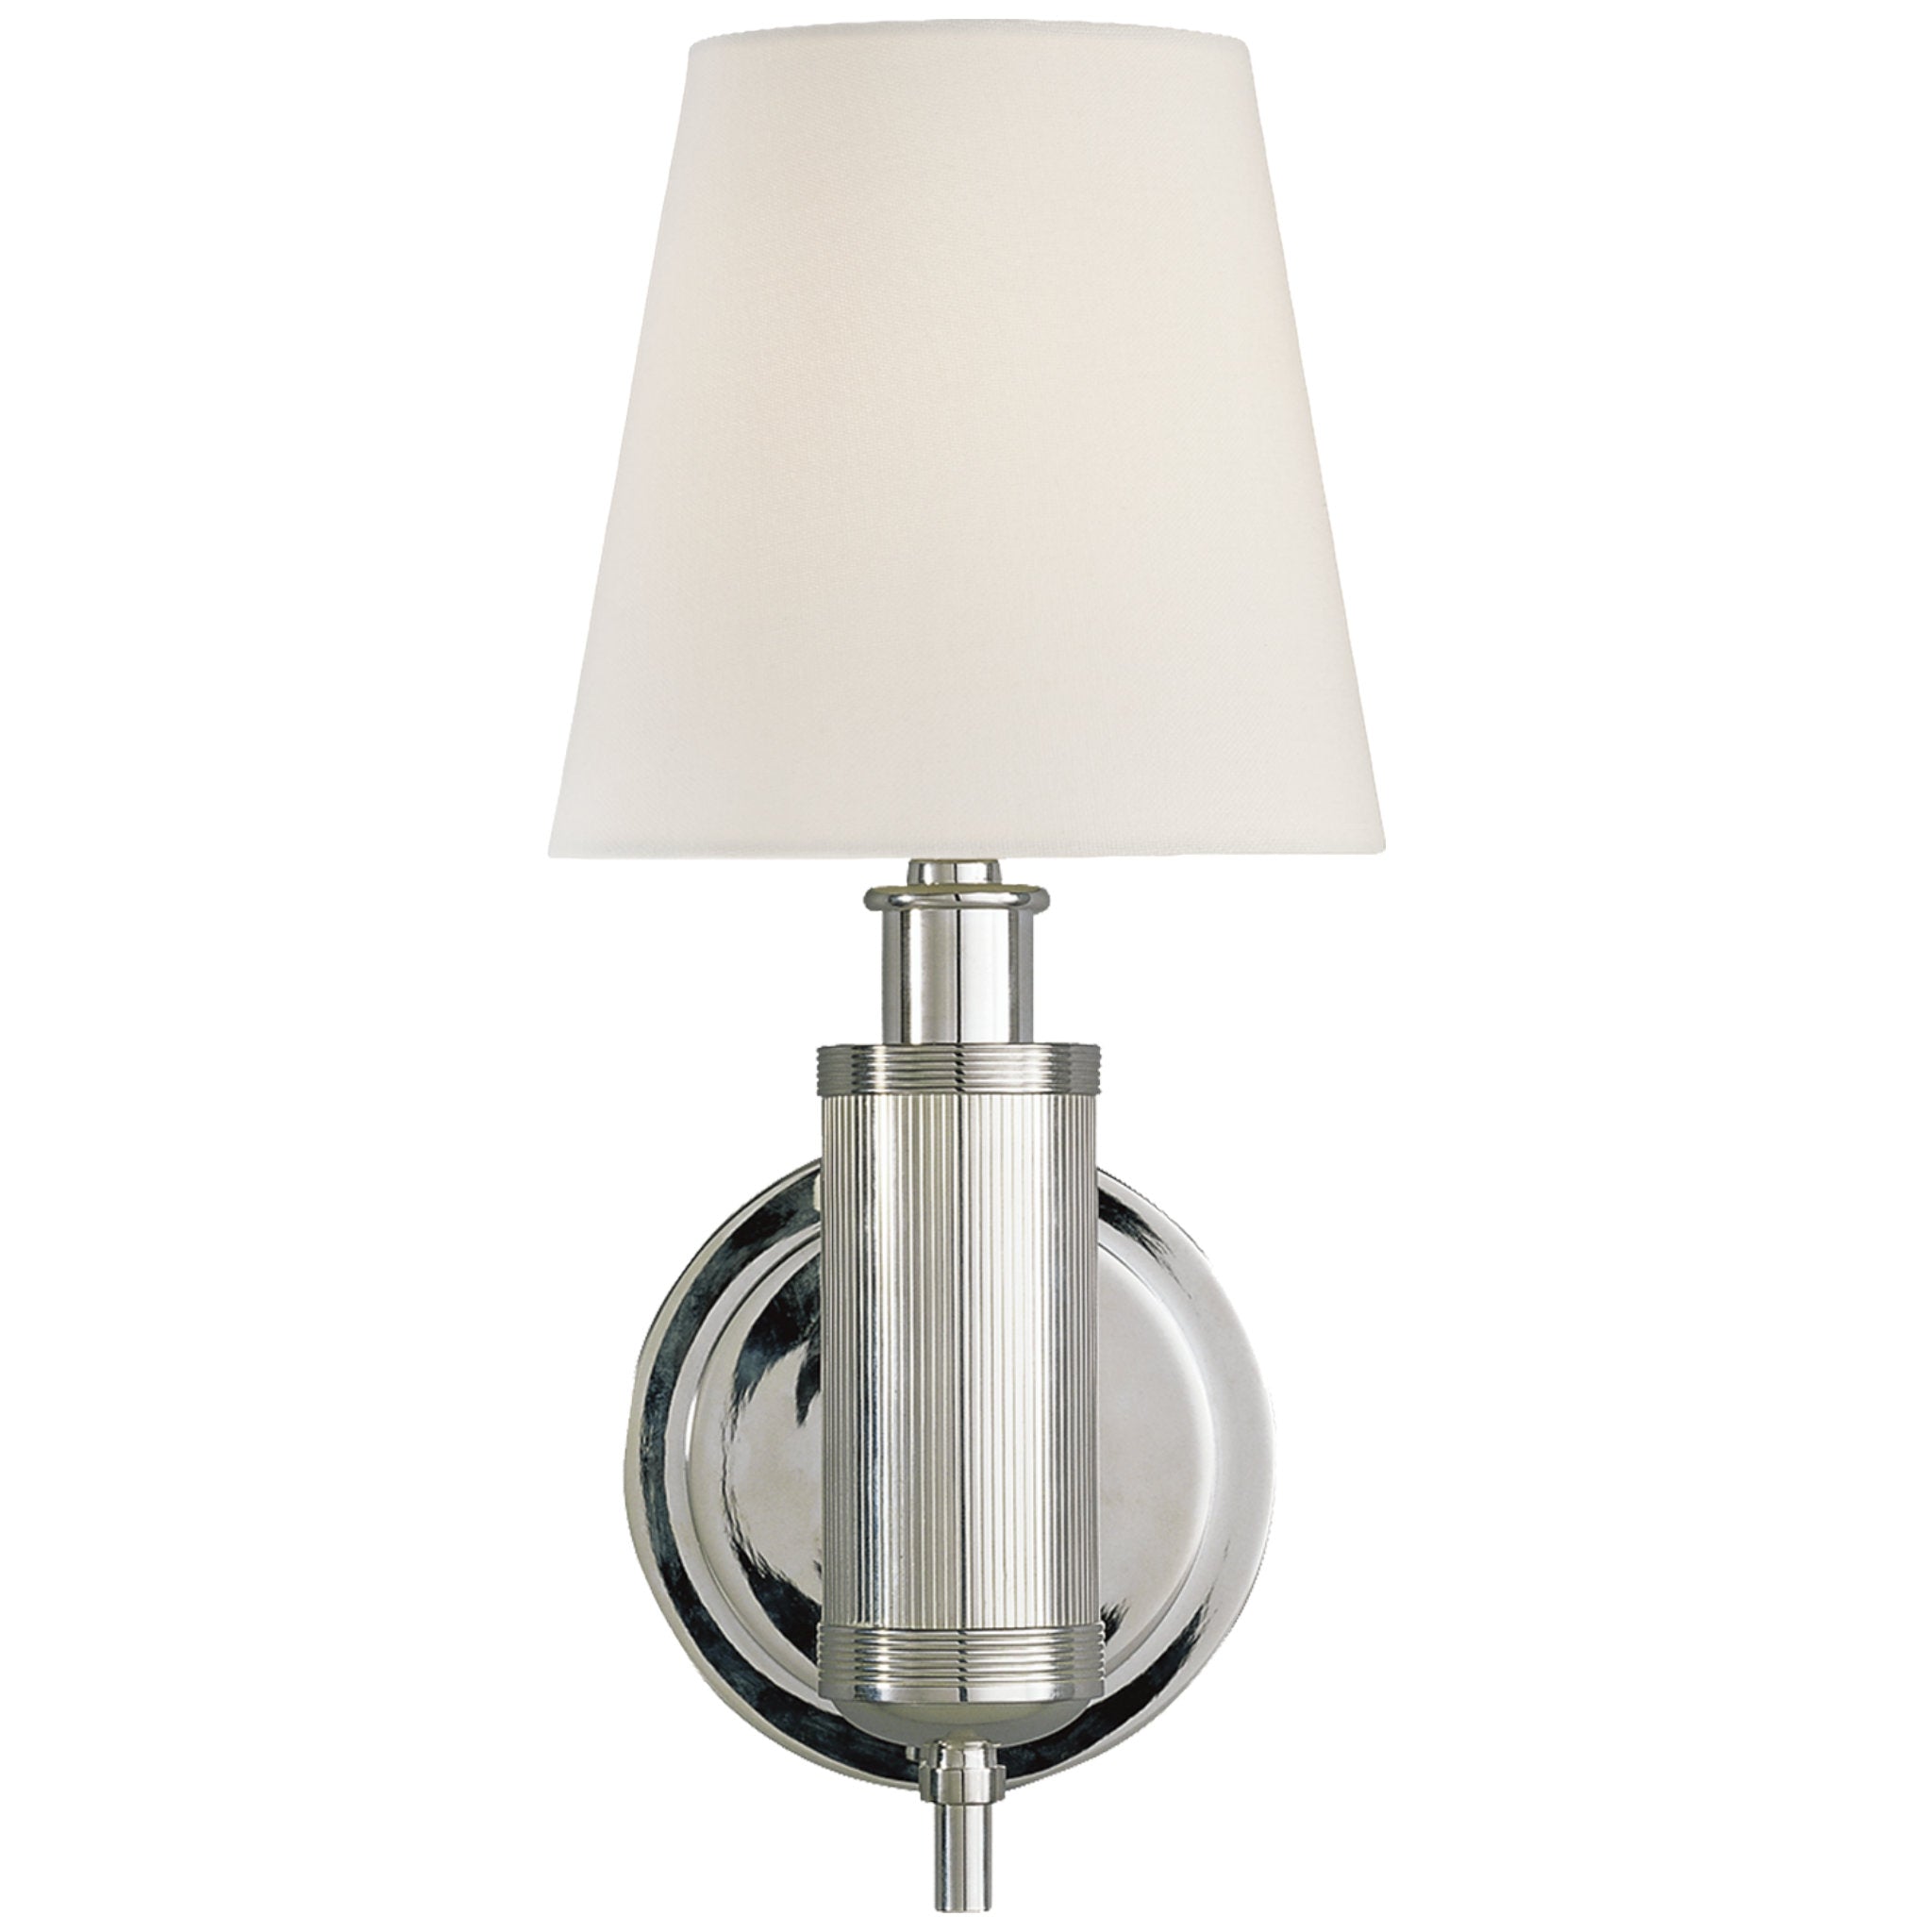 Thomas O'Brien Longacre Sconce in Polished Nickel with Linen Shade